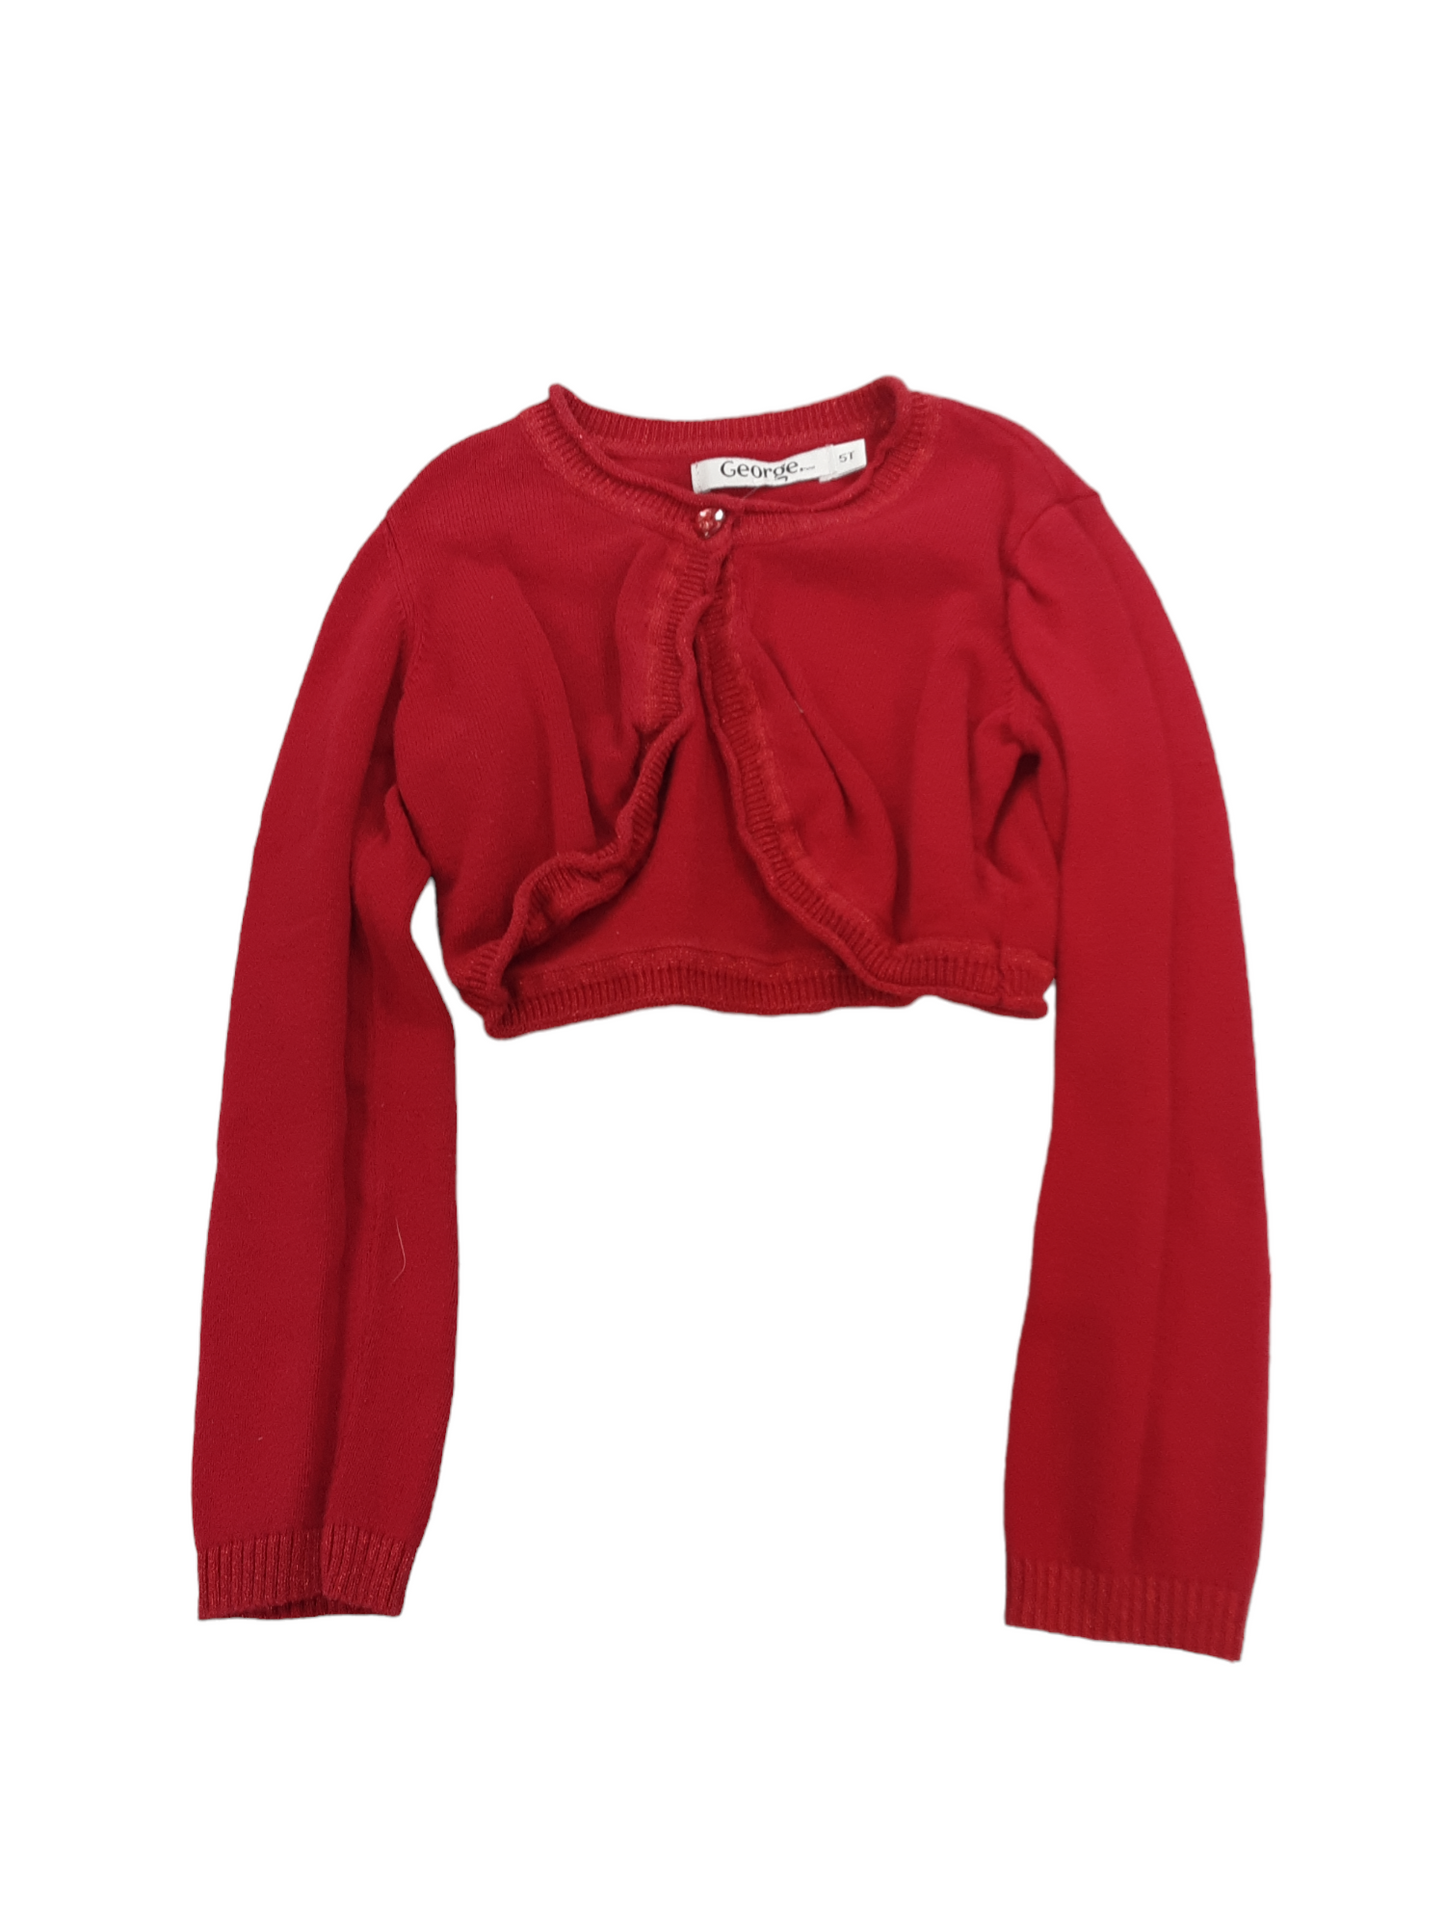 Cool red cardigan 5t